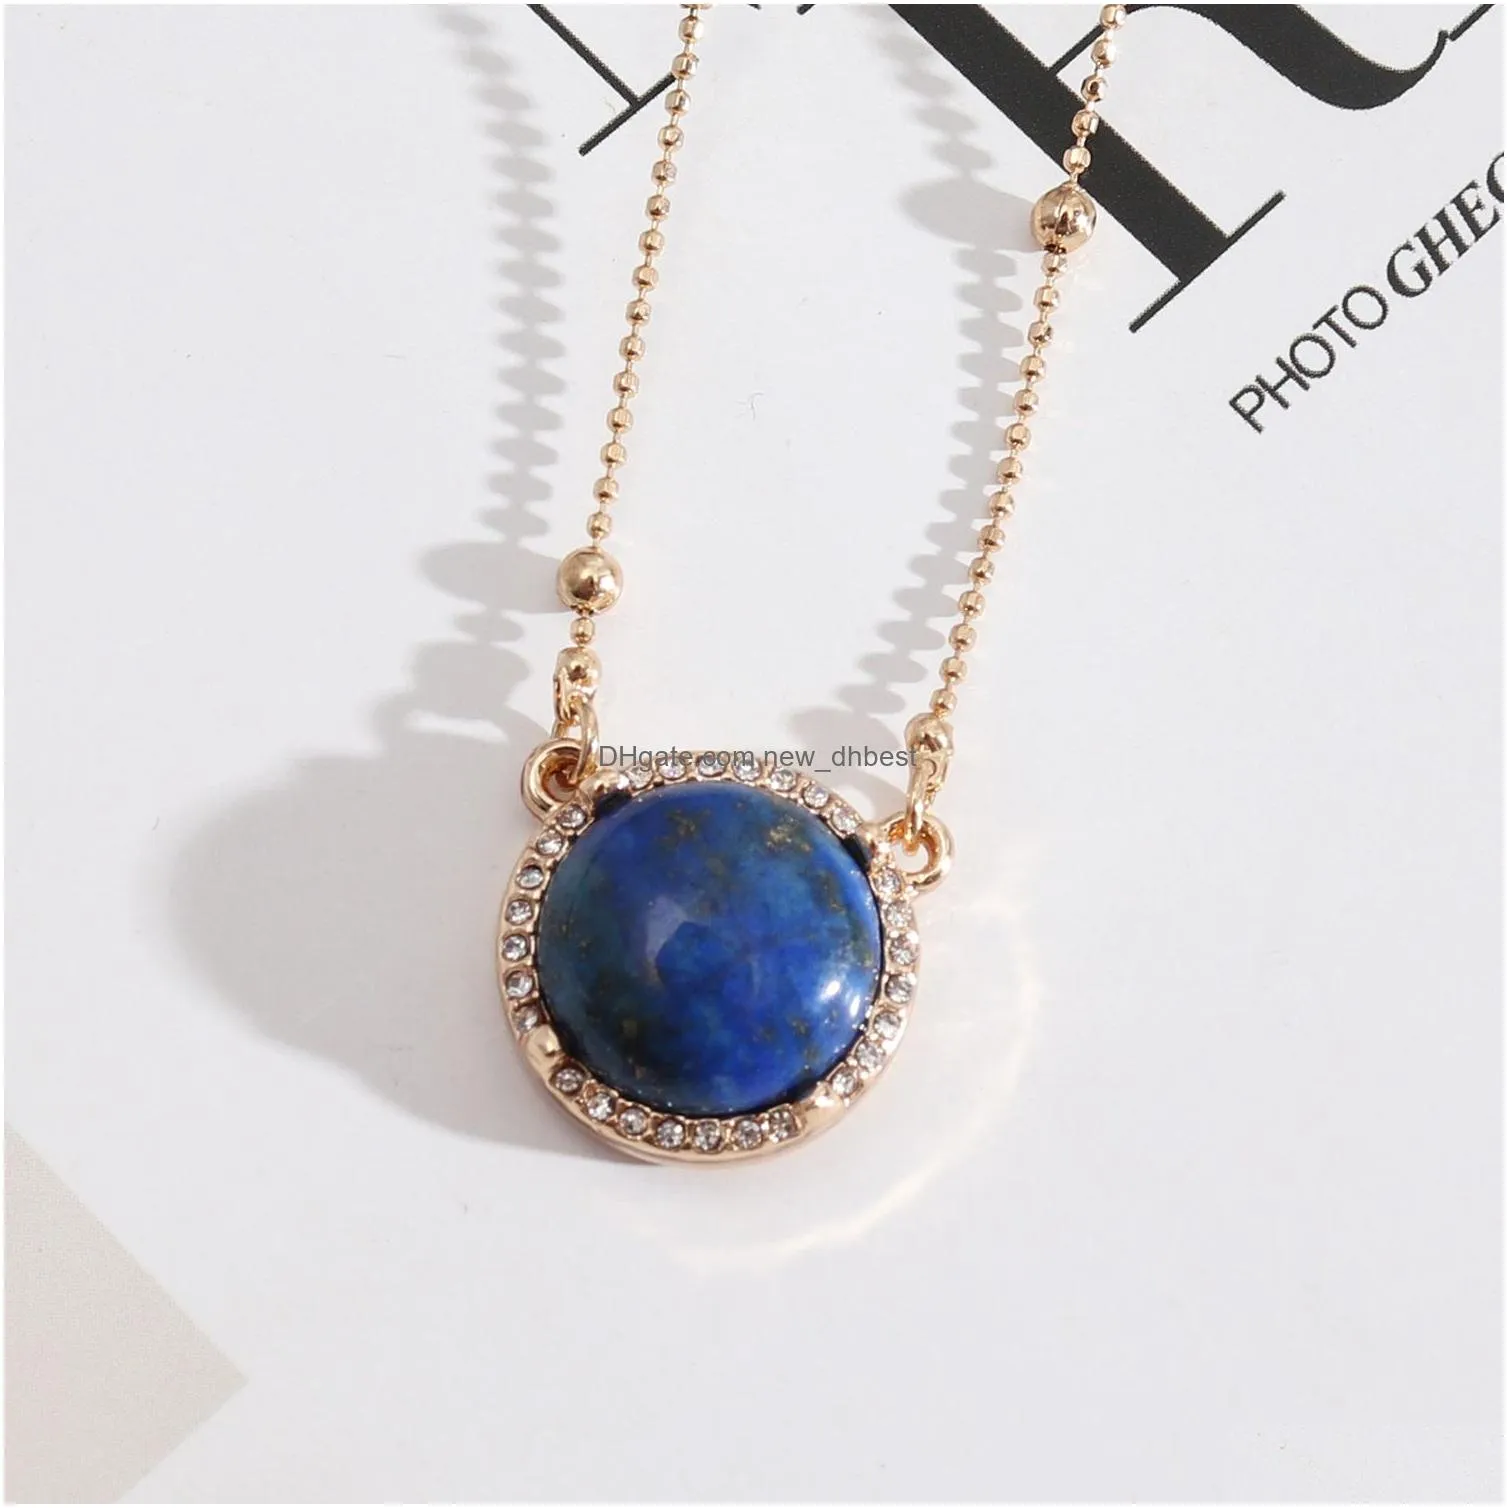 exquisite natural stone pendant lapis lazuli turquoise pink rose quartz chakra healing gold chain necklace for women jewelry